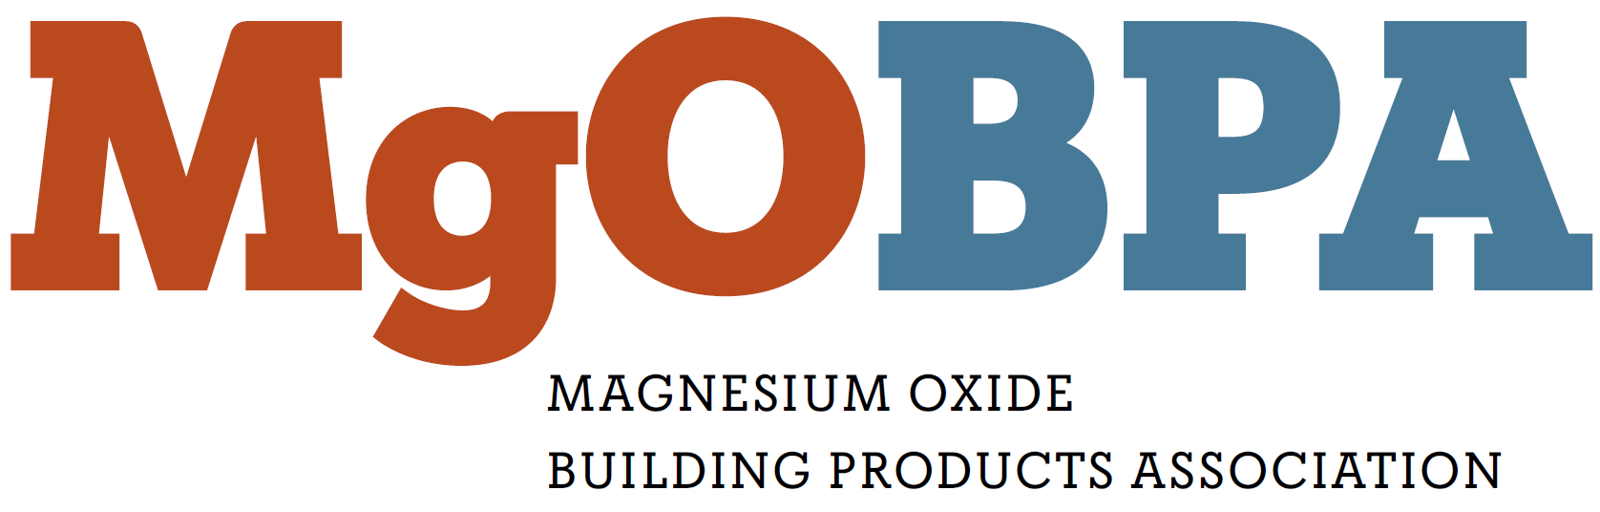 MgOBPA Magnesium Oxide Building Products Association